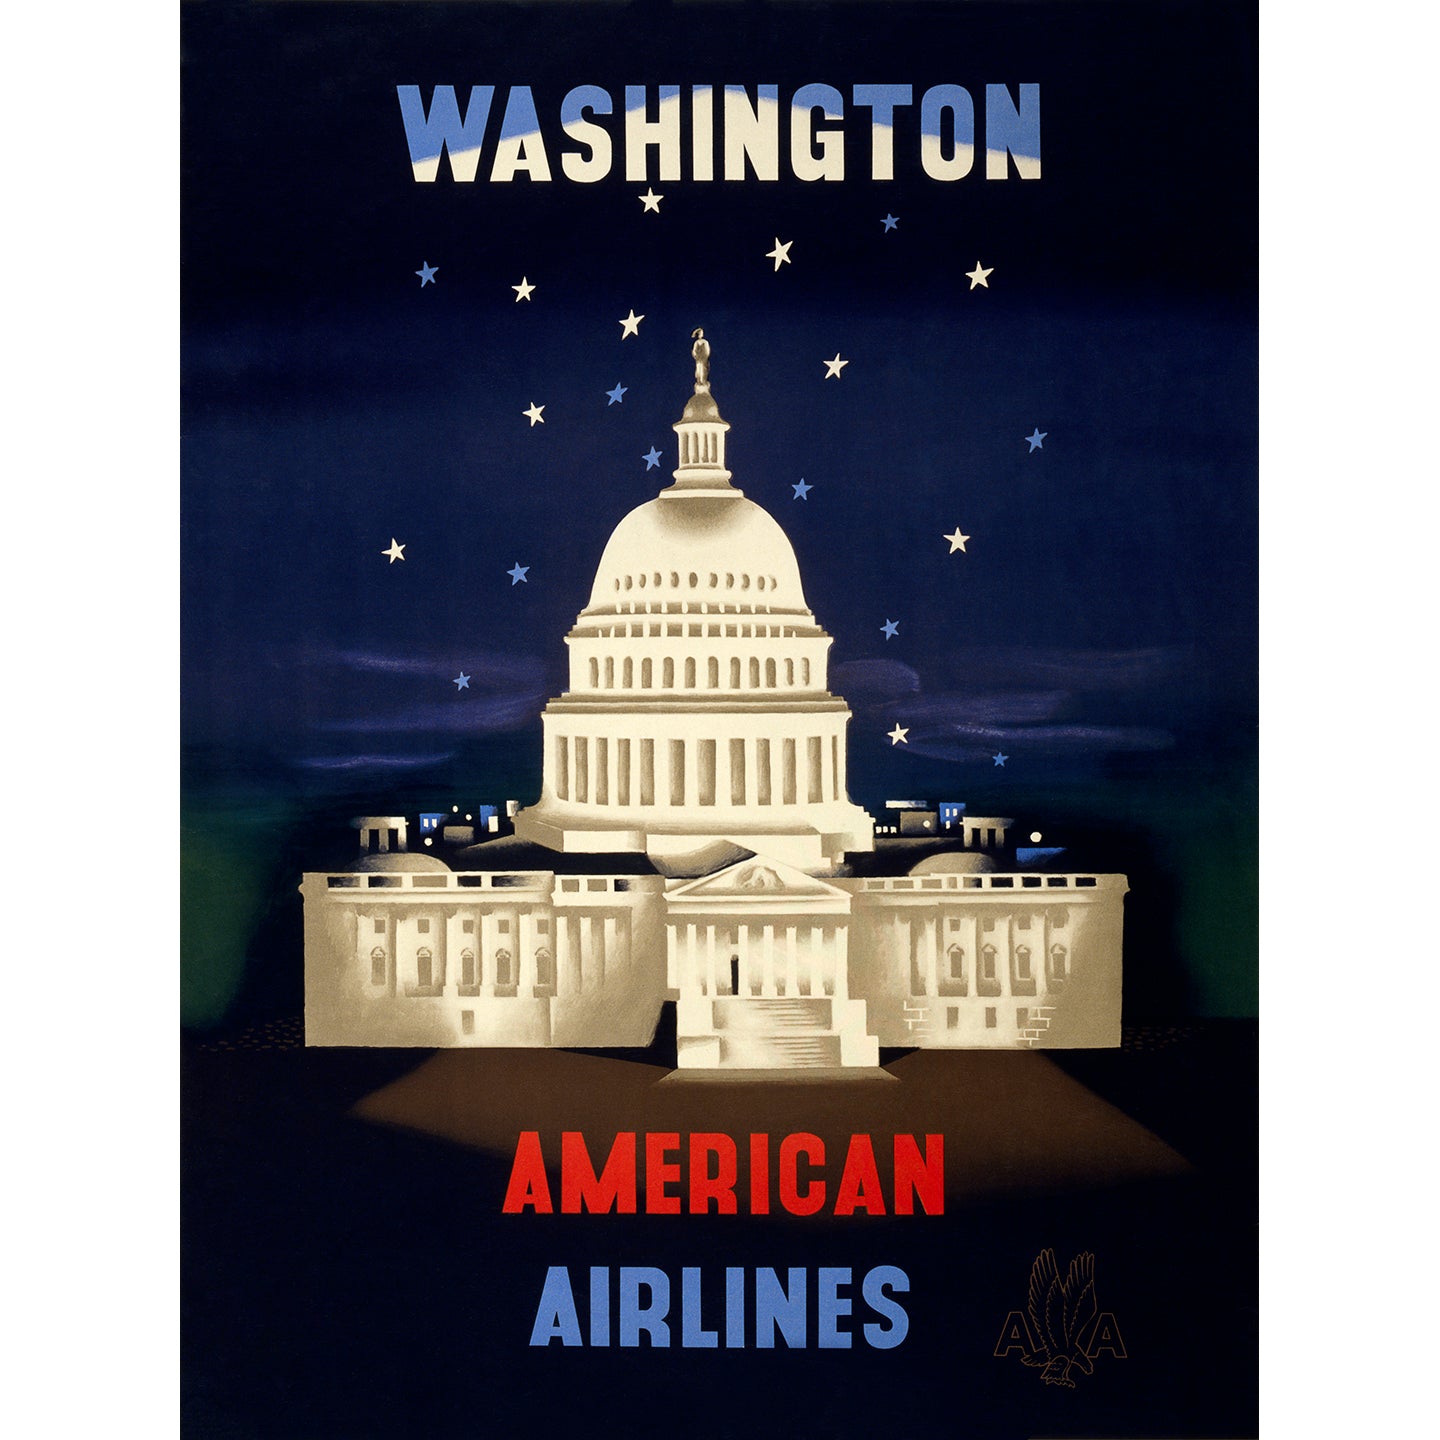 Vintage travel poster for American Airlines to Washington DC